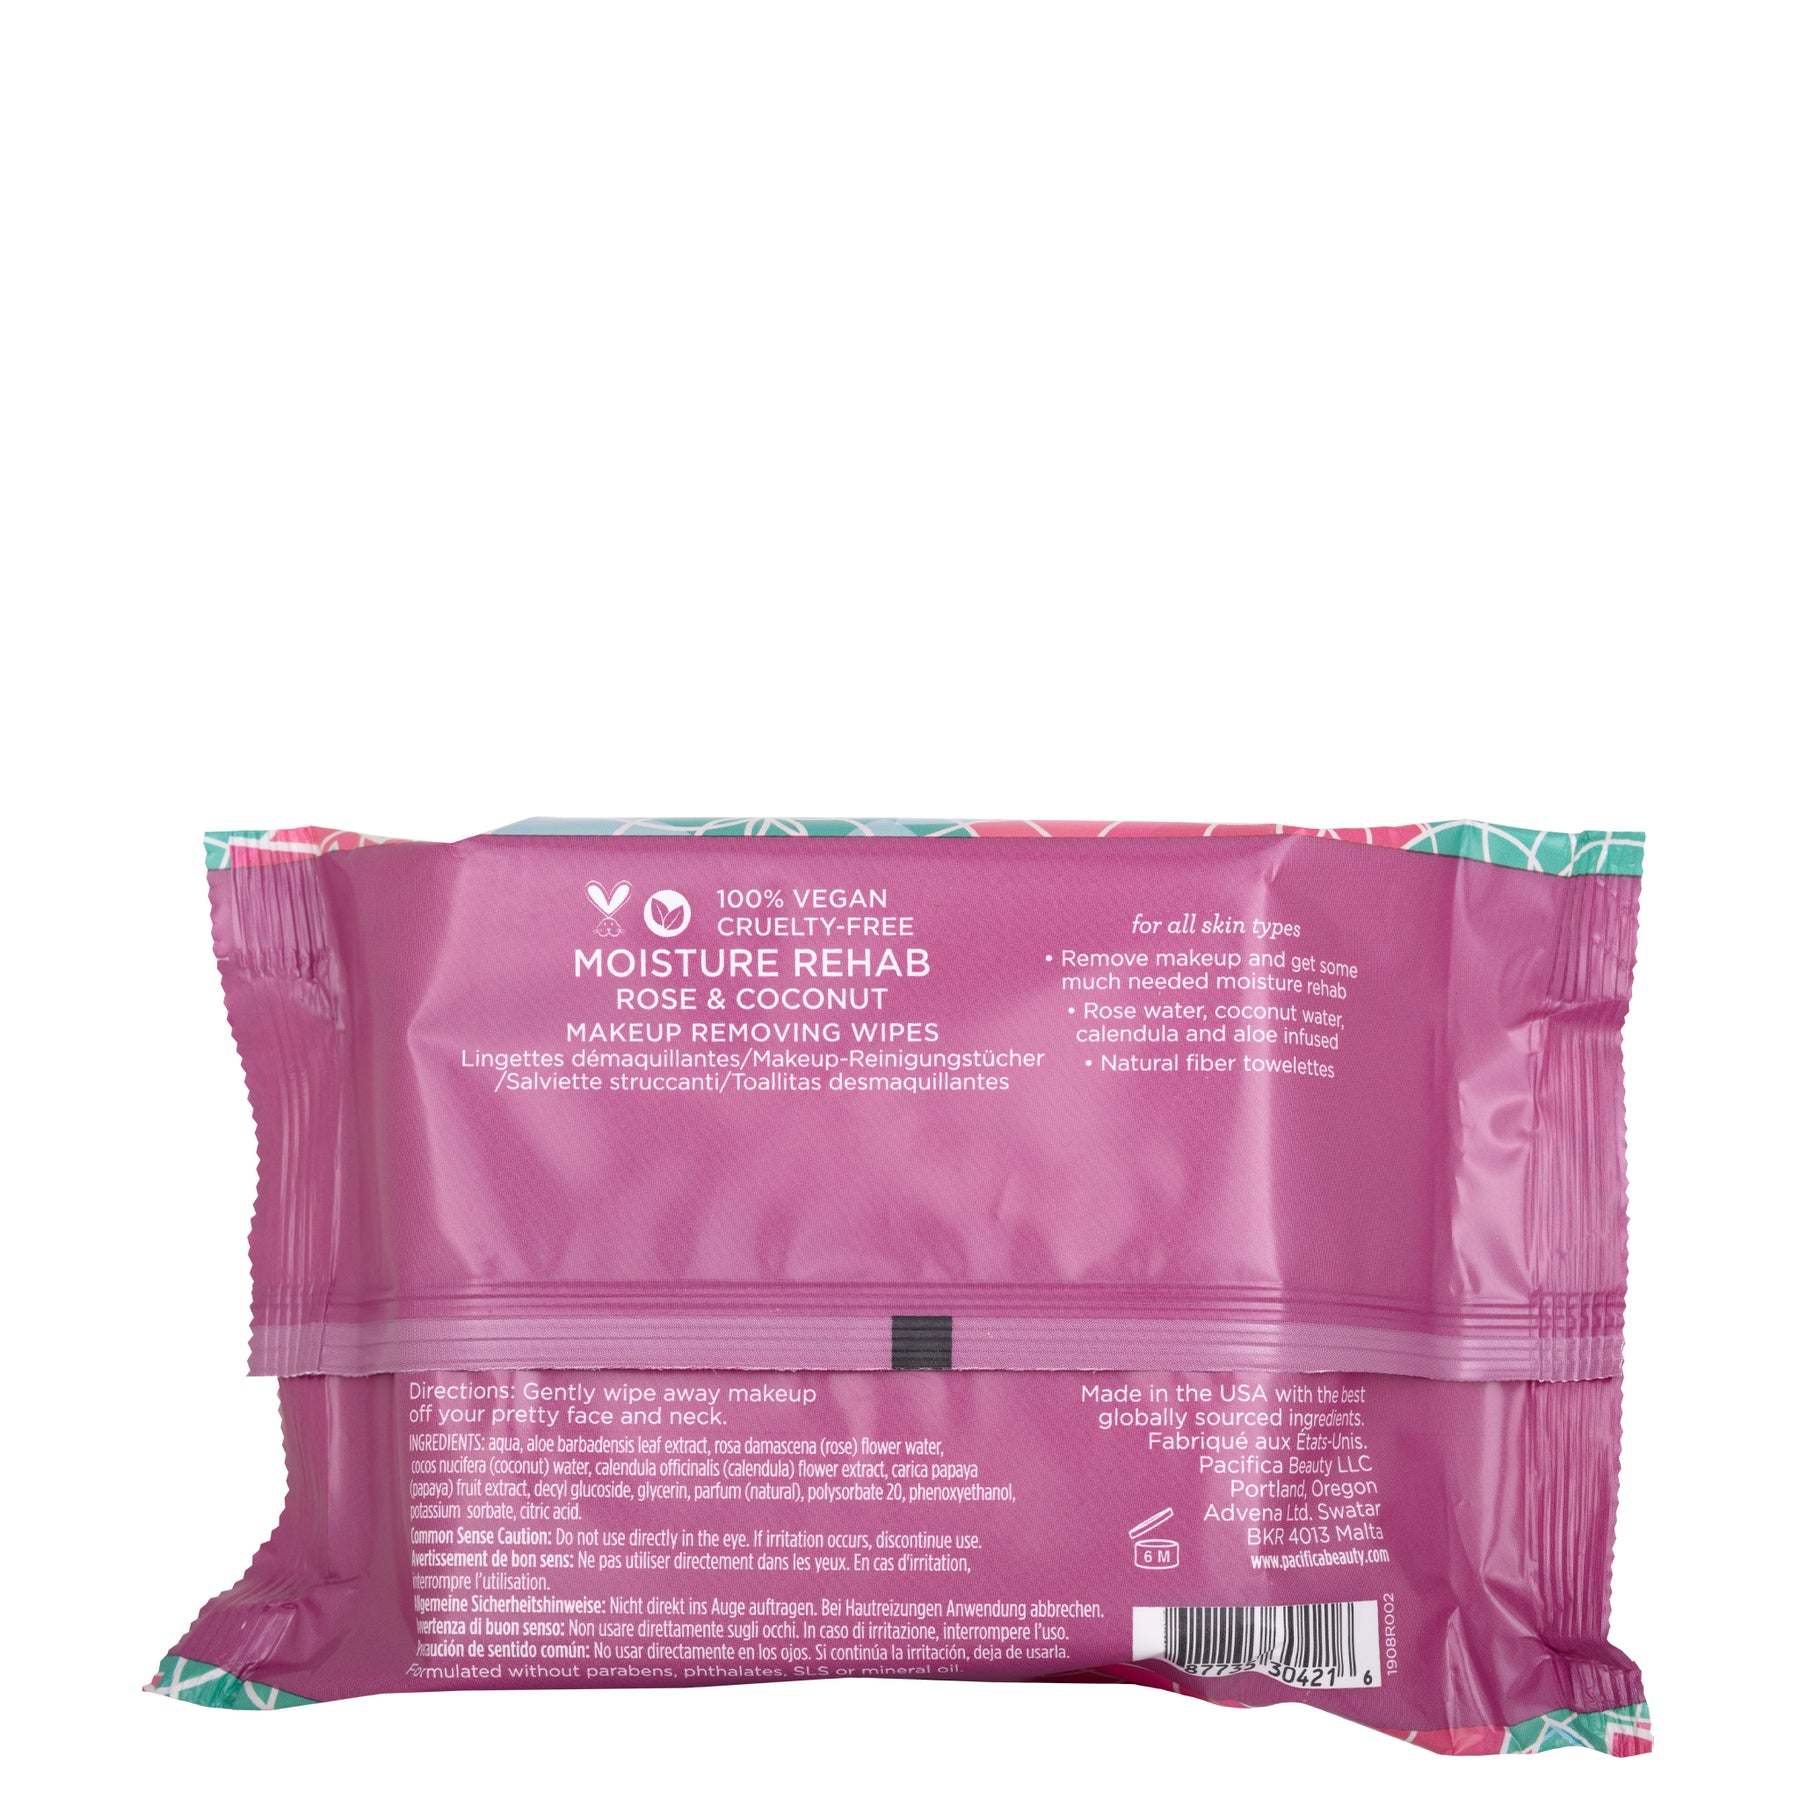 Moisture Rehab Rose & Coconut Makeup Removing Wipes - Skin Care - Pacifica Beauty